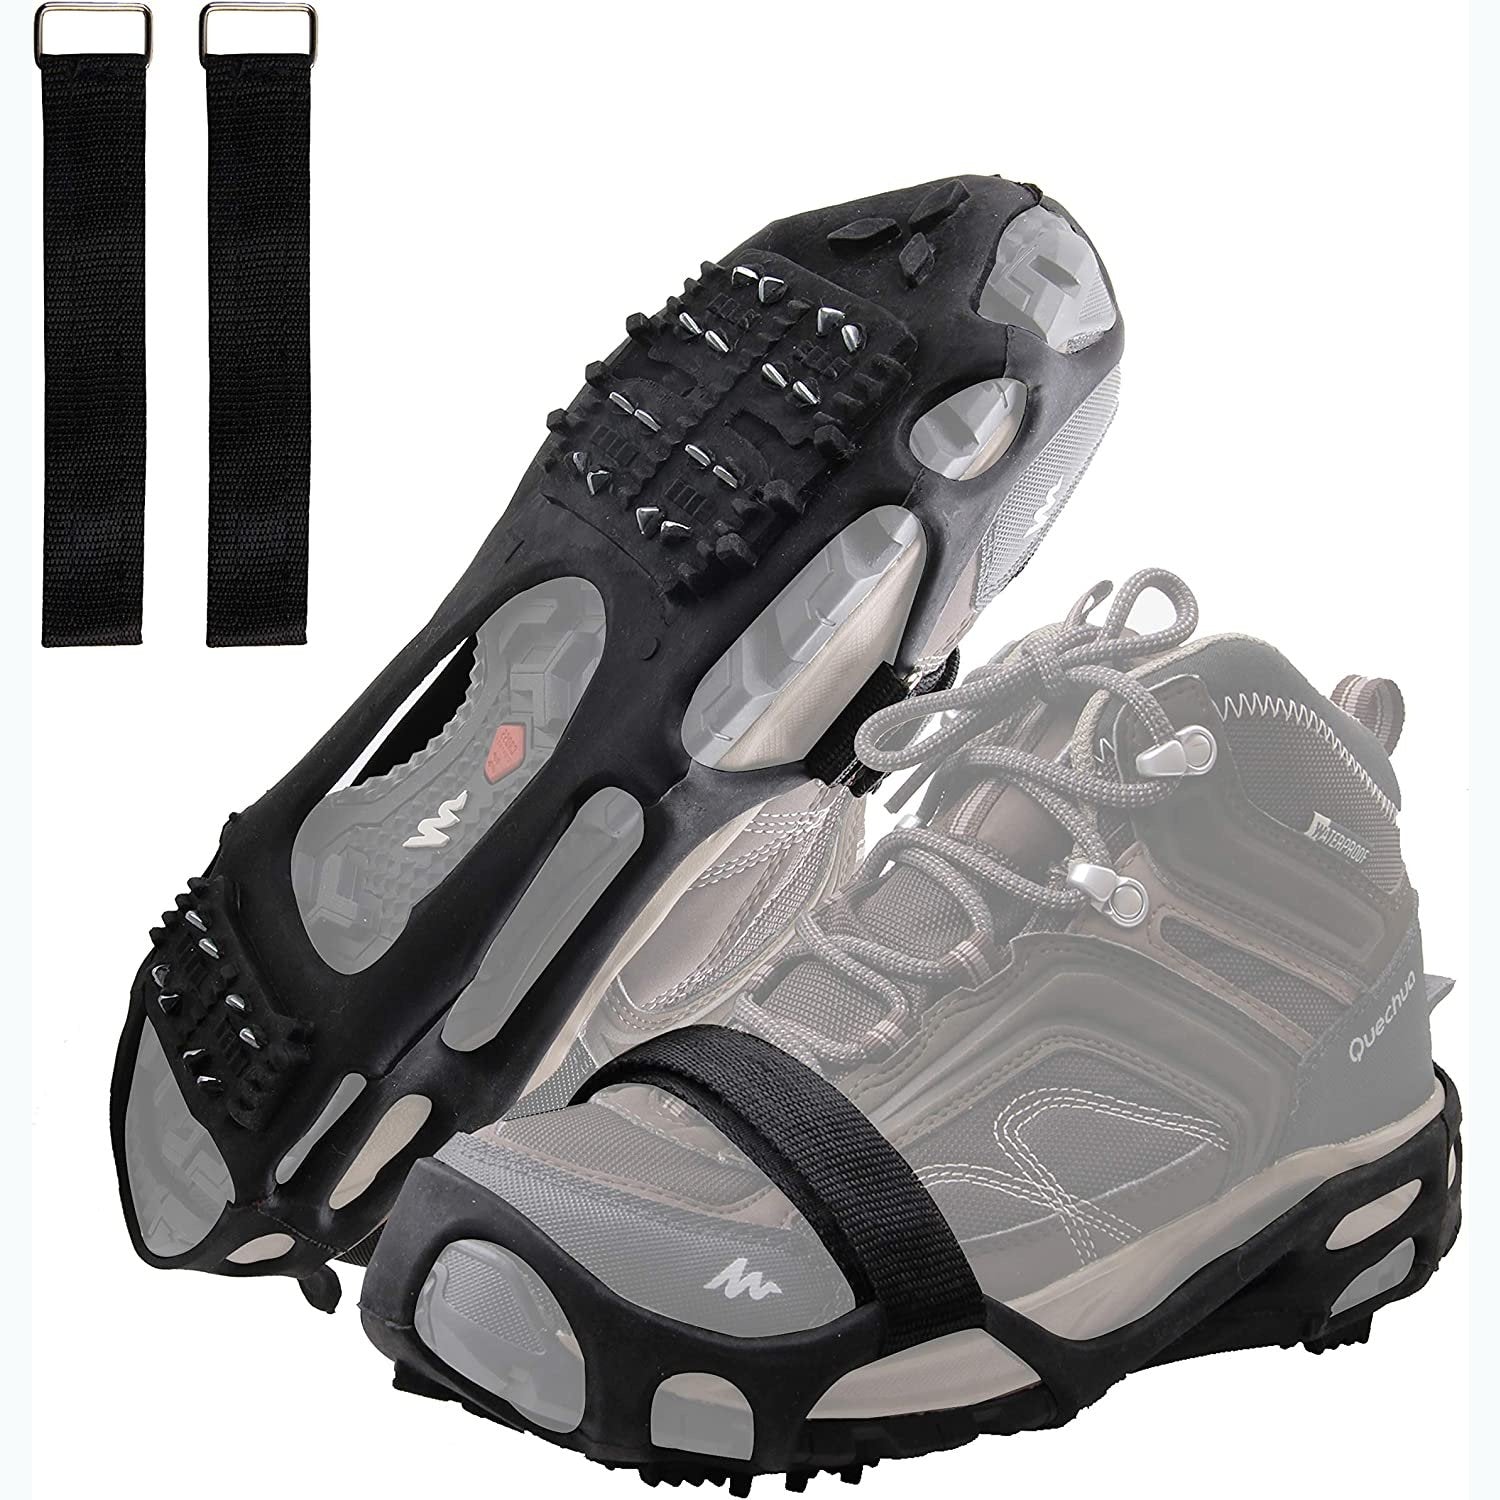 Ice Cleats Snow Traction Cleats Crampon for Walking on Snow and Ice No